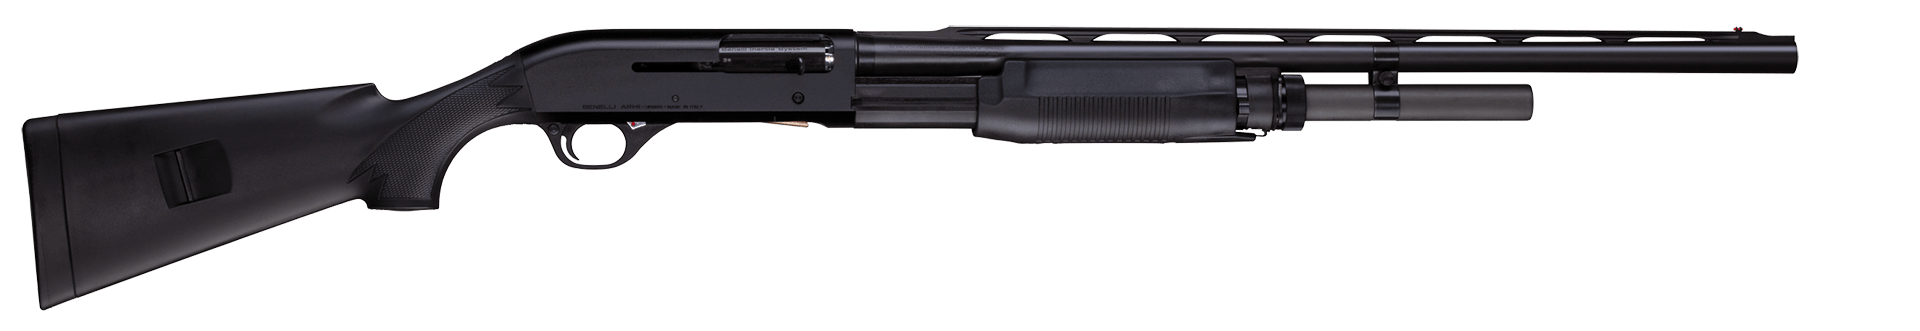 benelli-m3.png